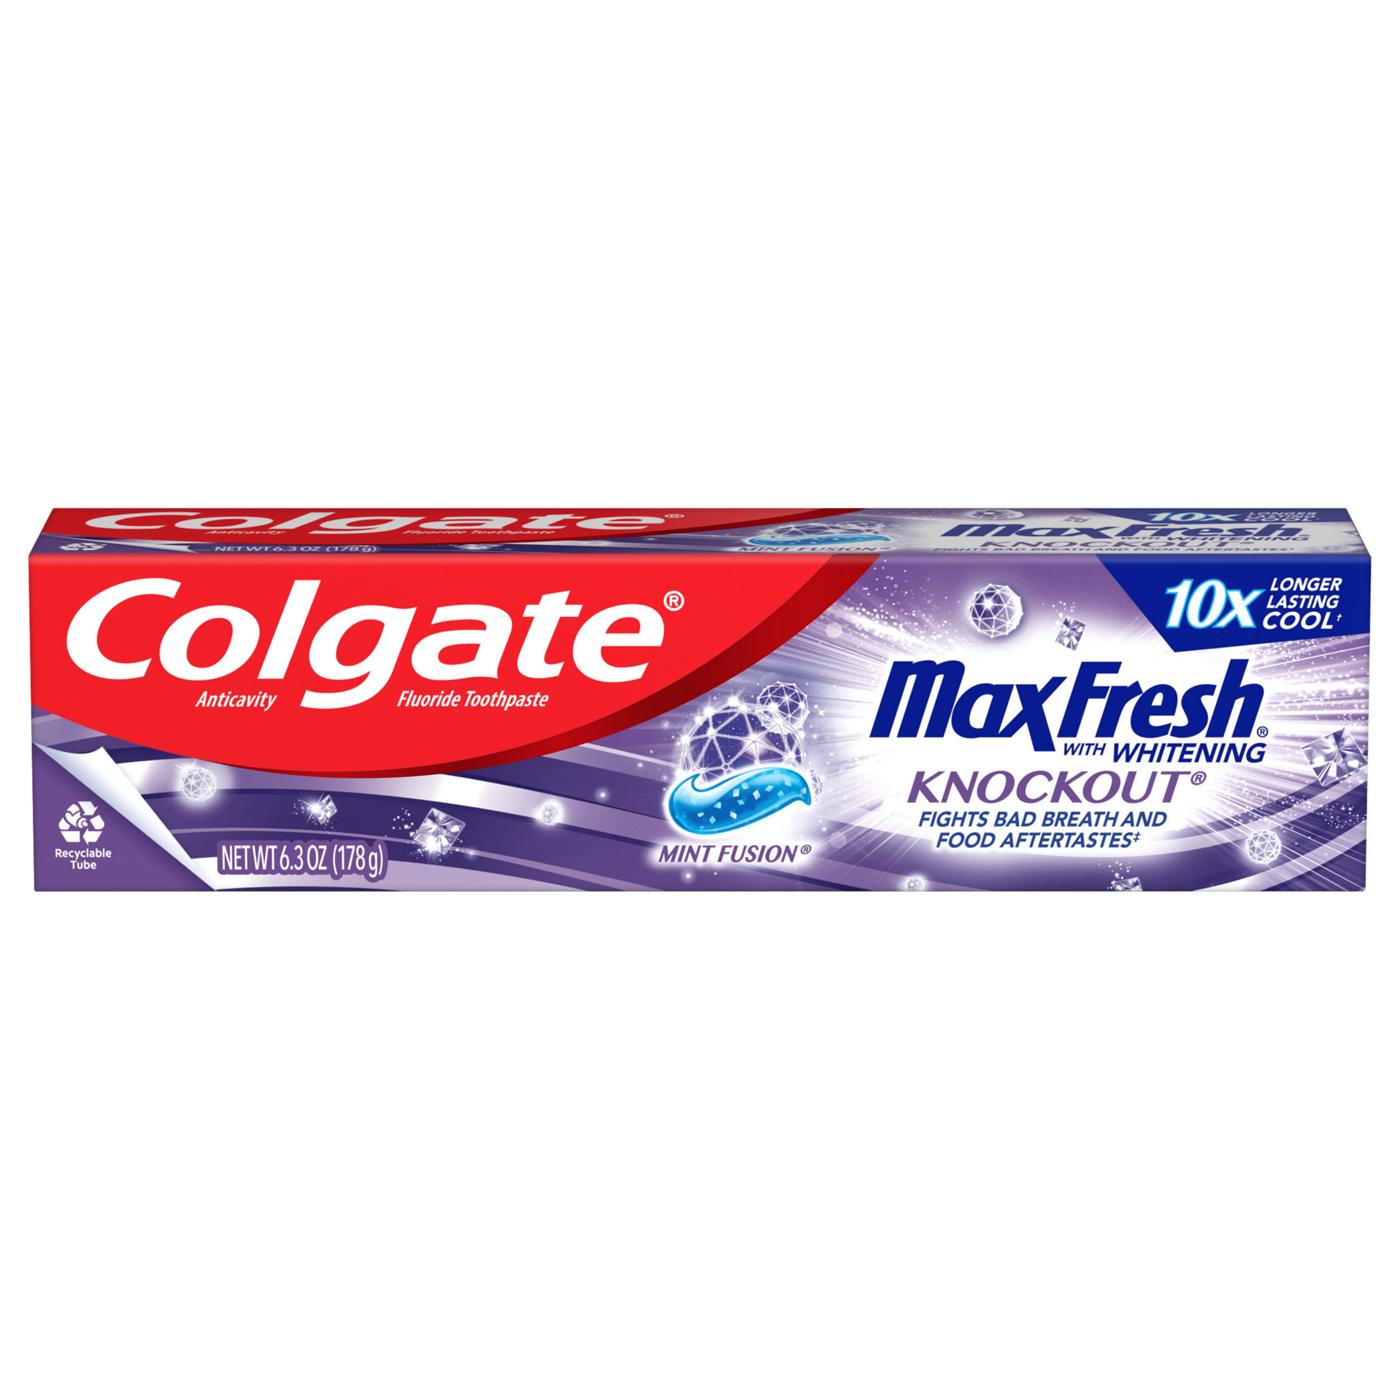 Colgate Max Fresh Anticavity Toothpaste - Mint Fusion; image 1 of 16